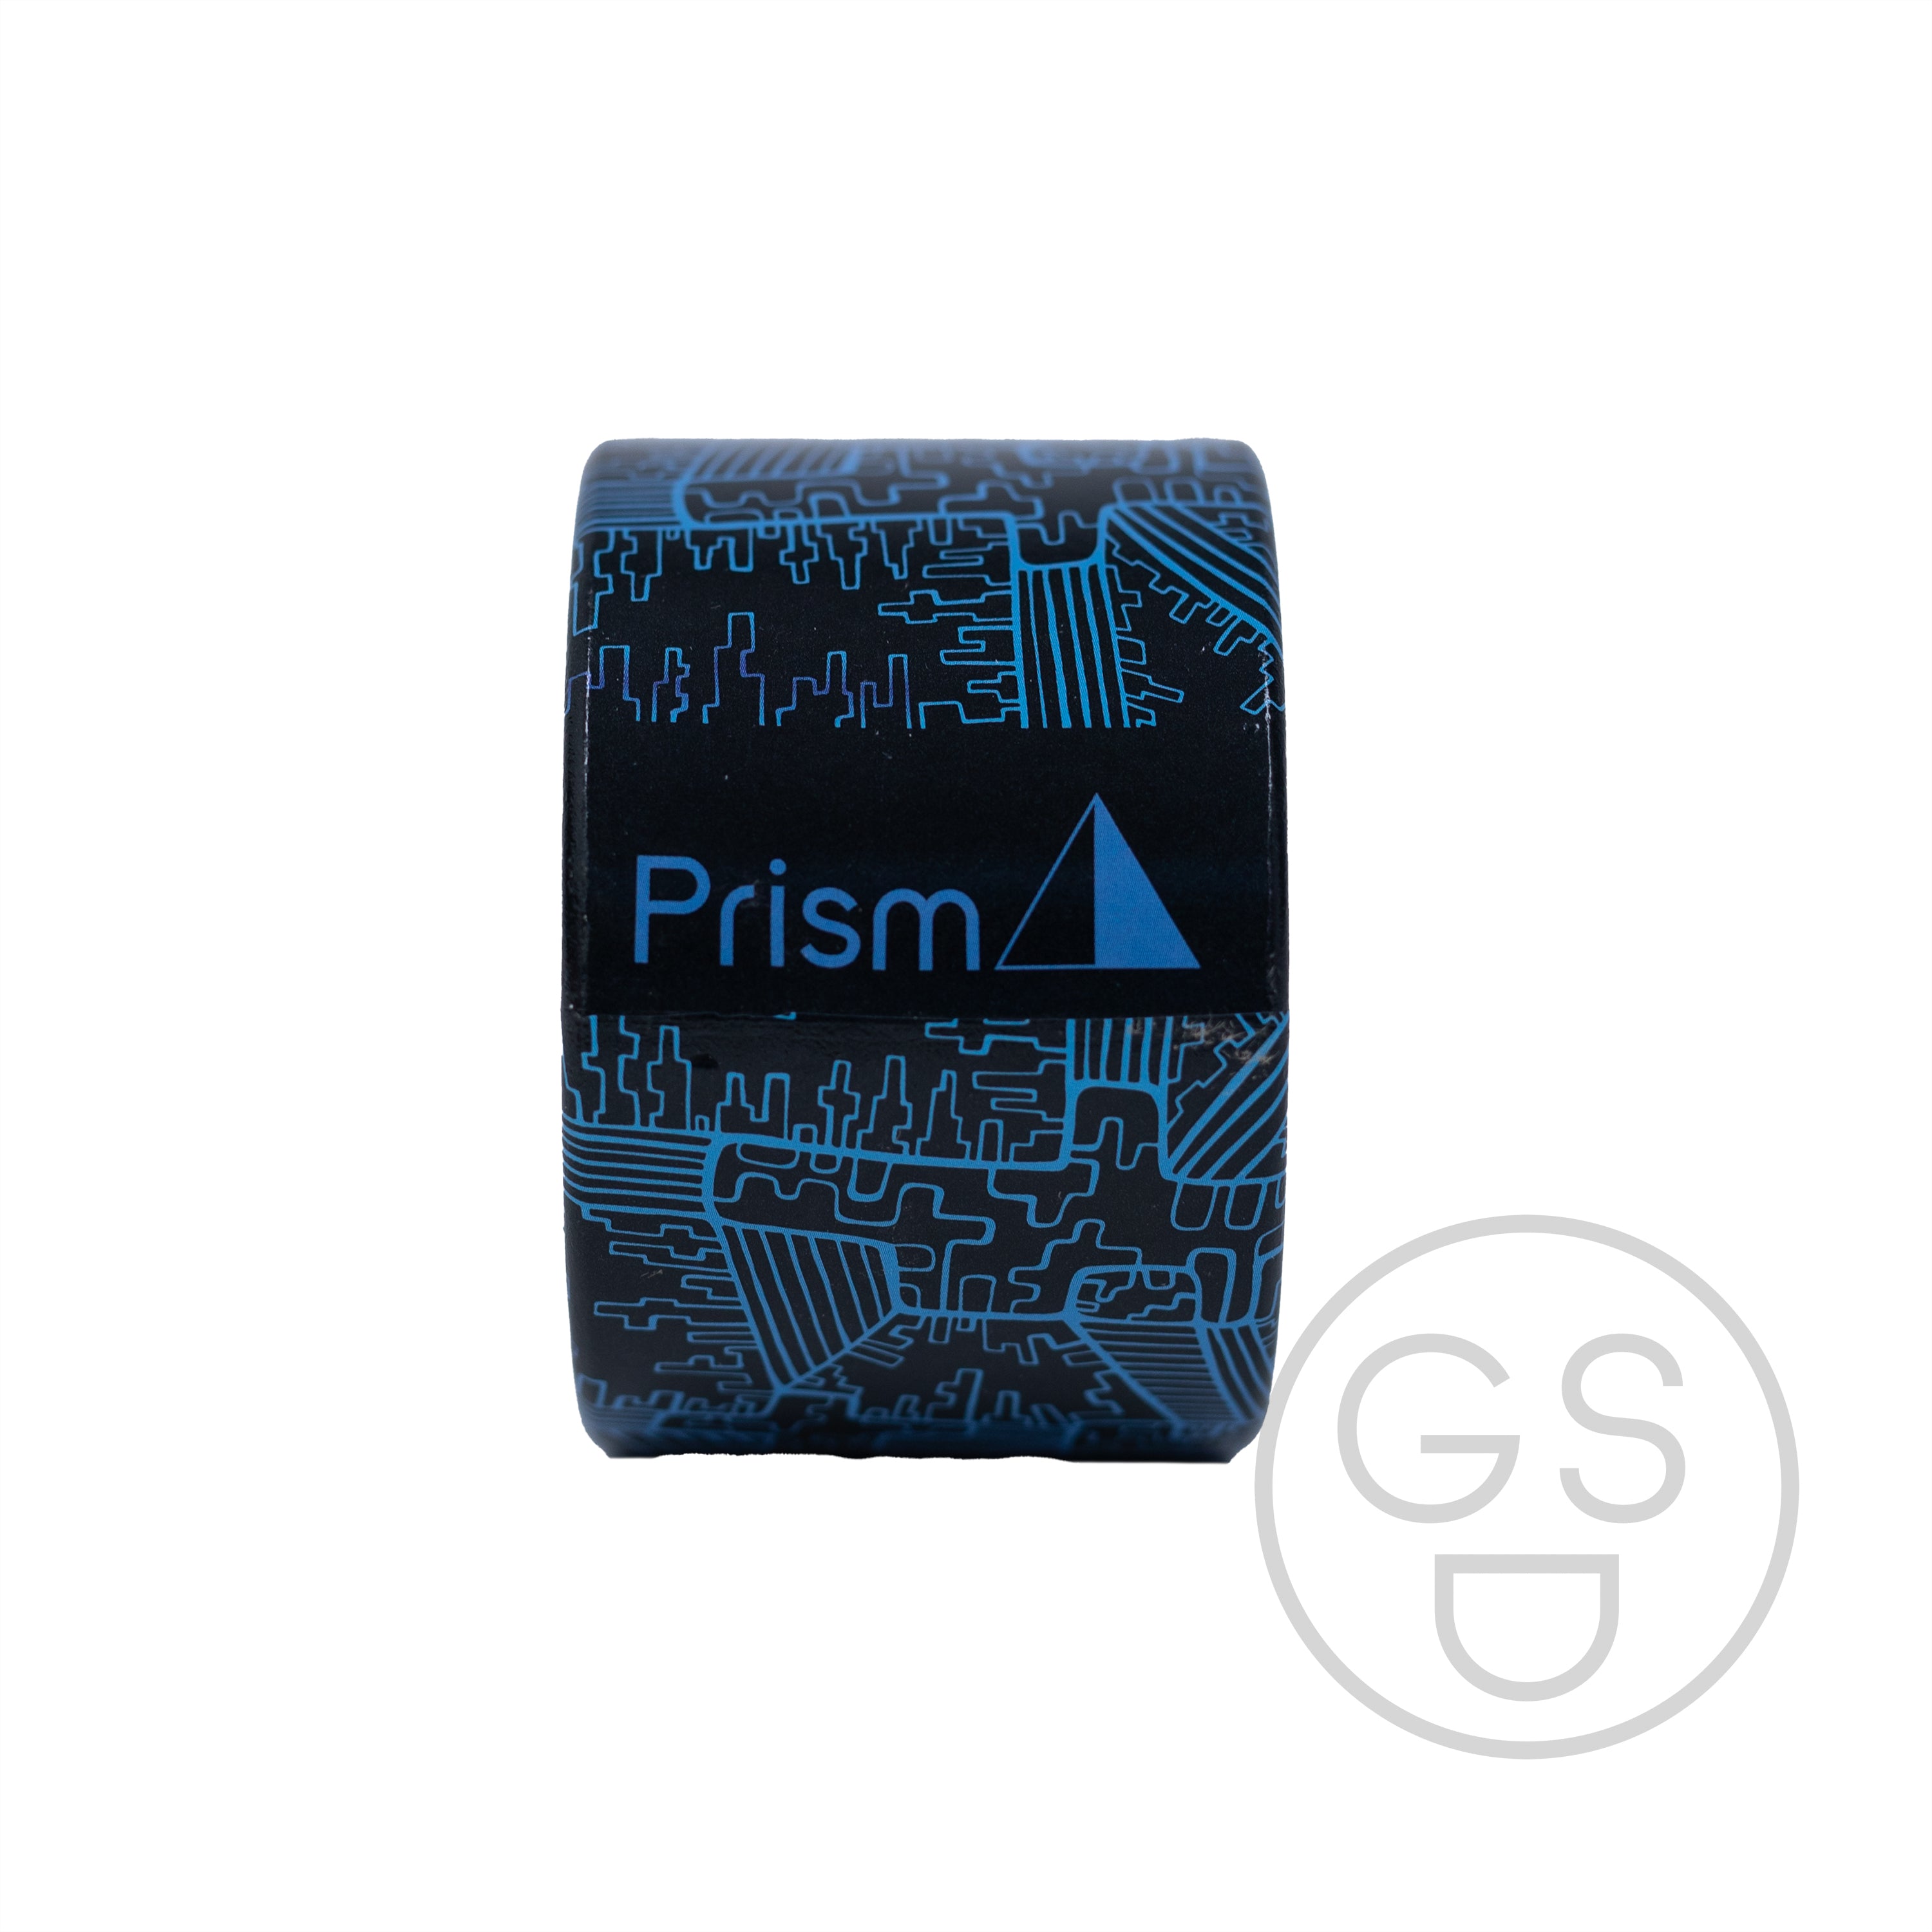 Prism Modular Waterpipe Halo Connector - Tron